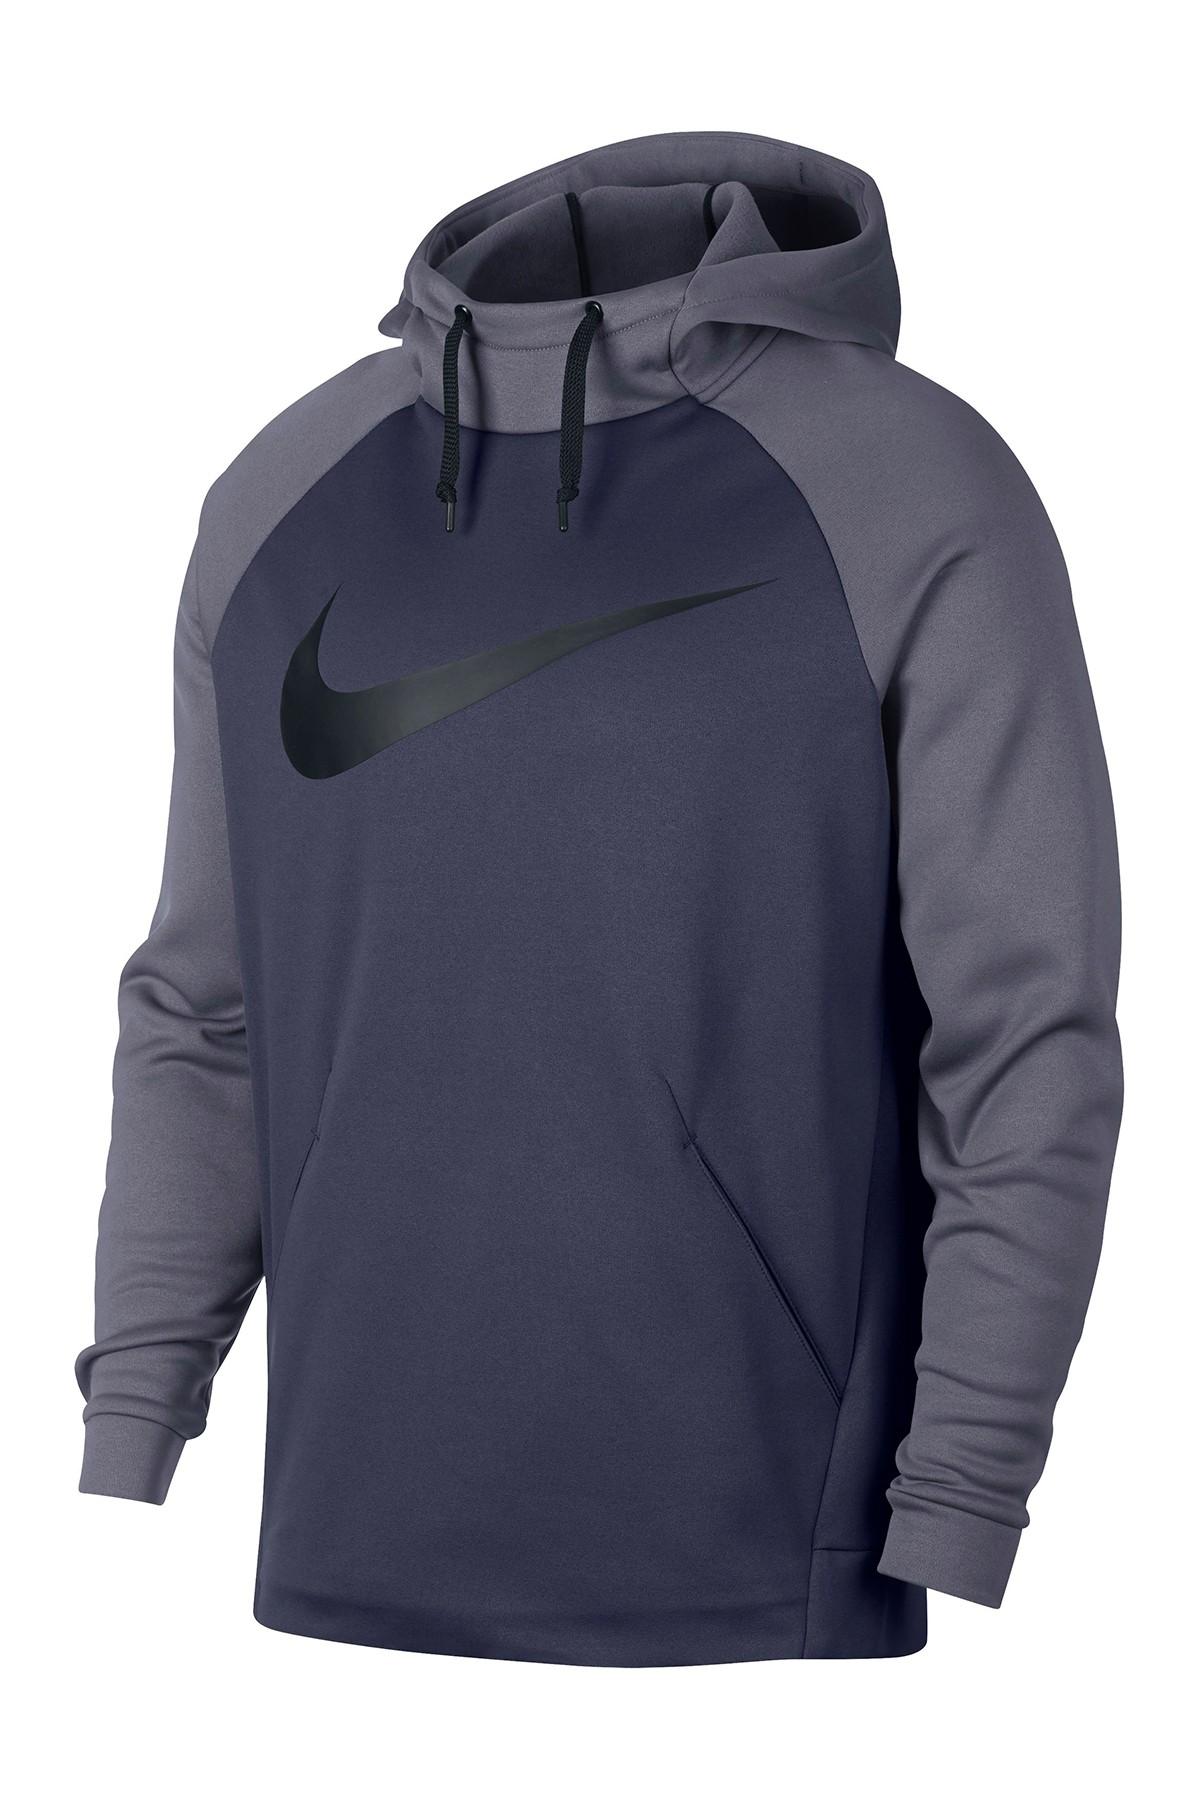 Nike Synthetic Therma Hd Pullover Hoodie in Blue for Men - Save 11% - Lyst